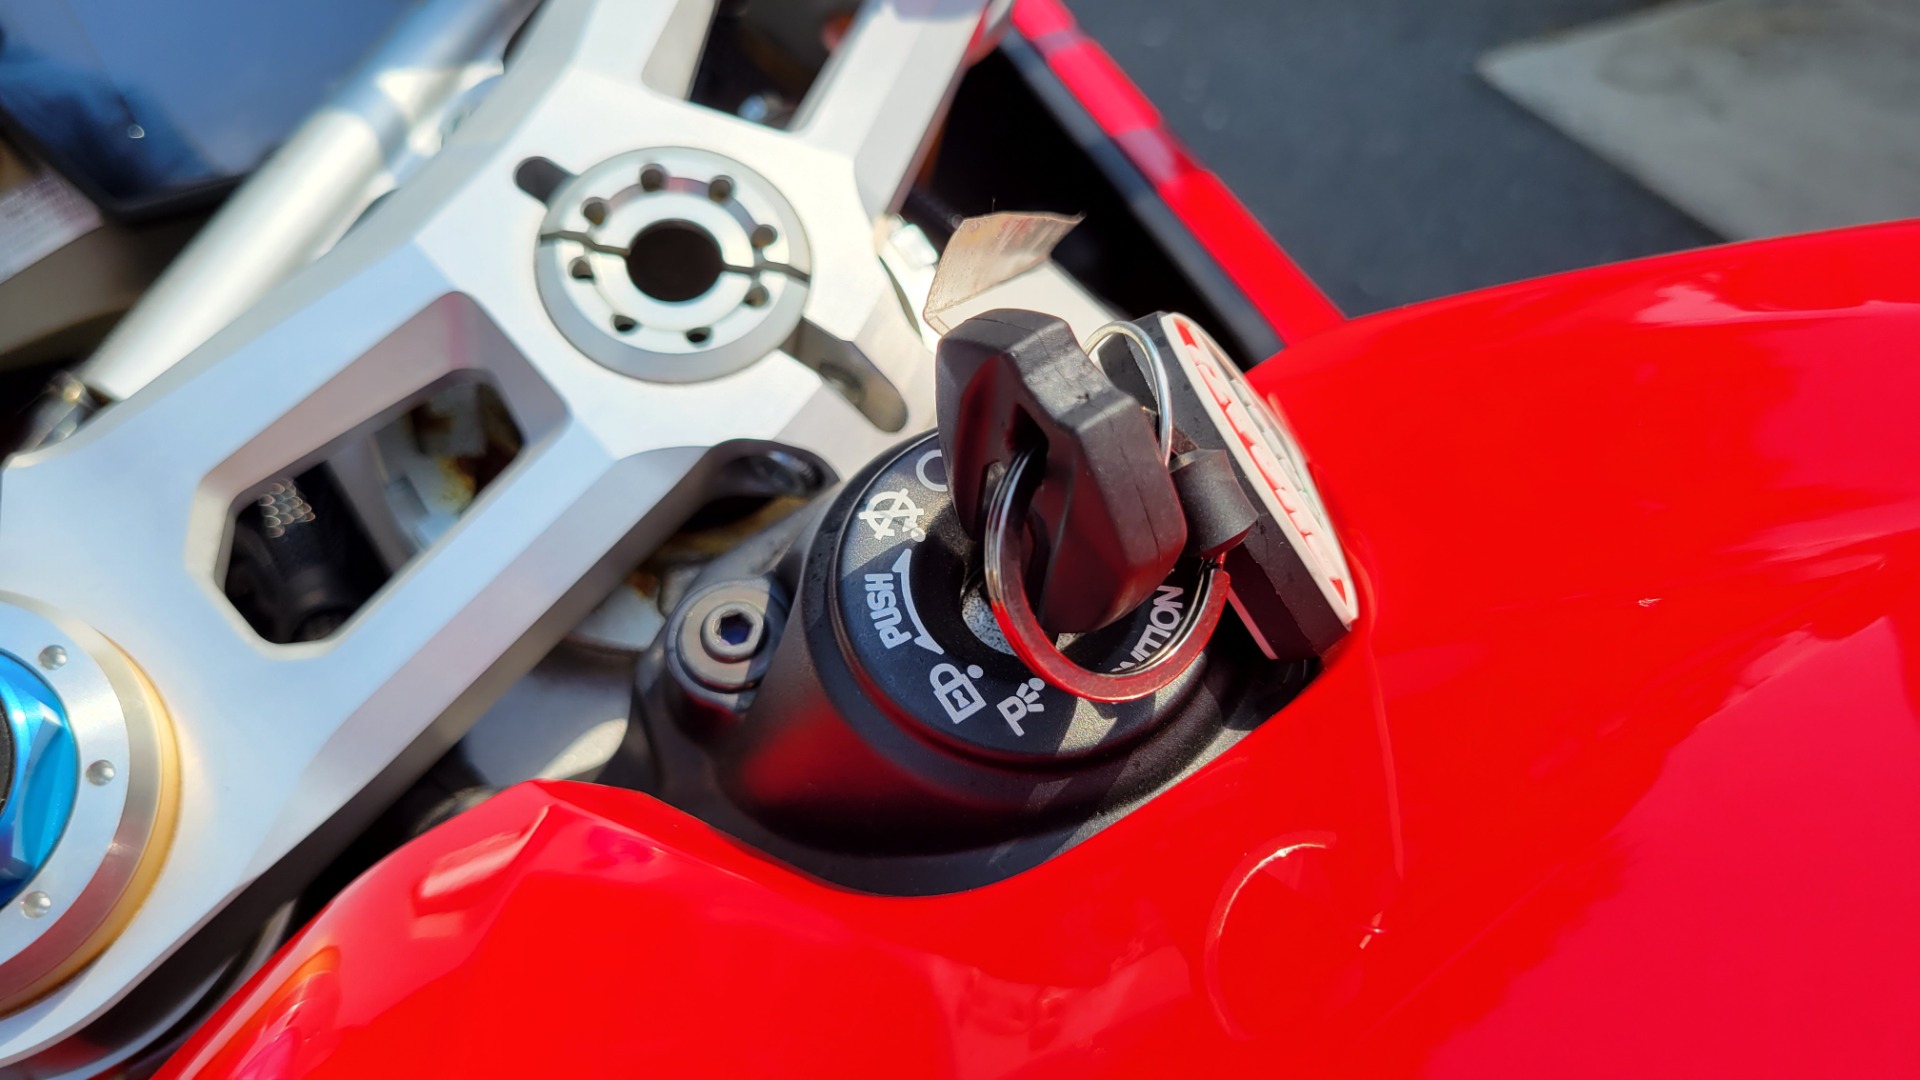 Used 2018 Ducati PANIGALE V4S / 1103CC 214HP / FUEL INJECTED / LOW MILES for sale Sold at Formula Imports in Charlotte NC 28227 22